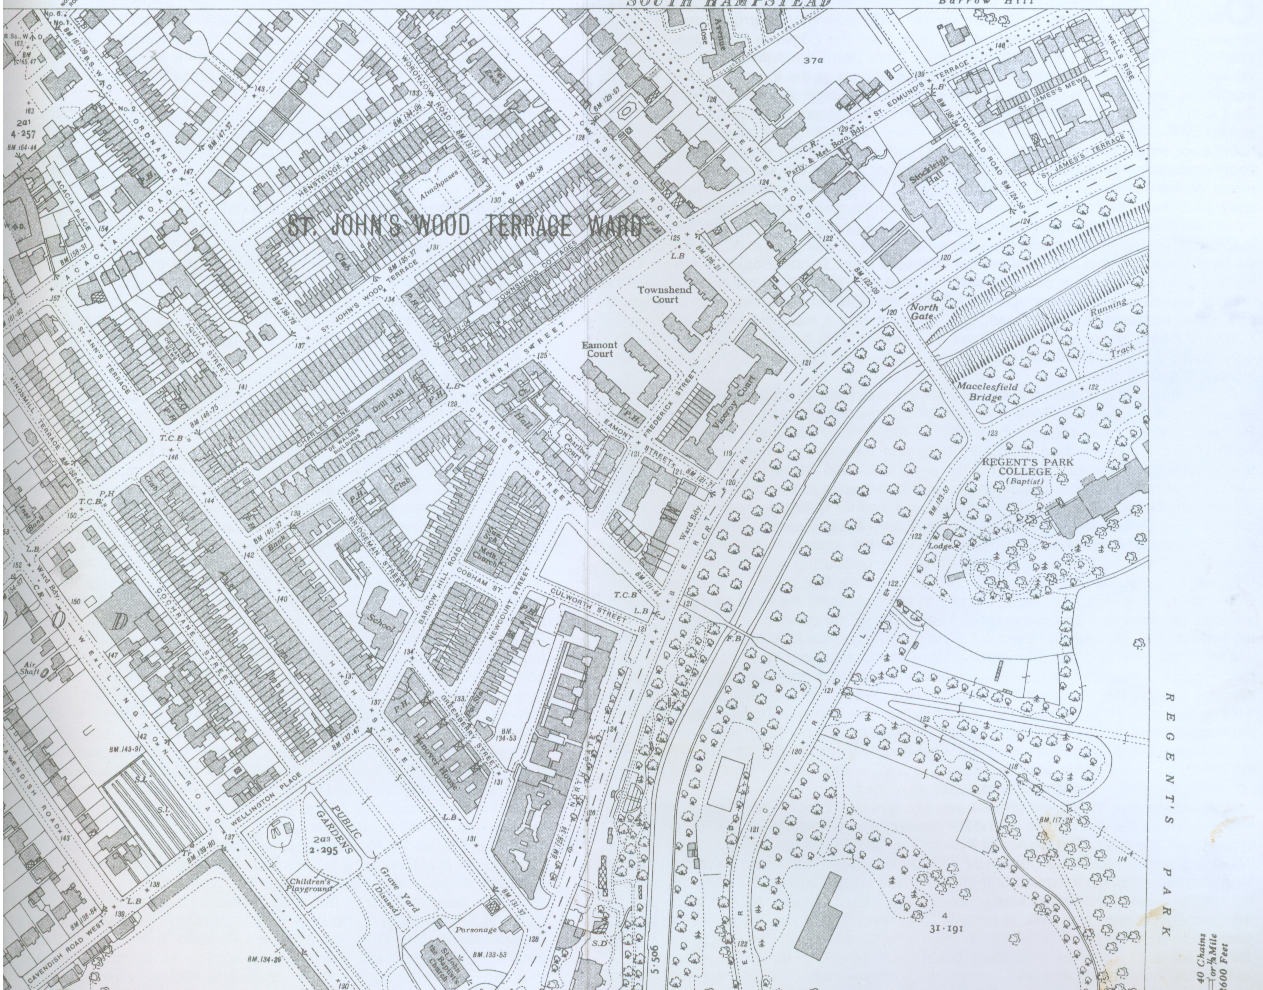 Aquila Street on 1937 map | Westminster Archives